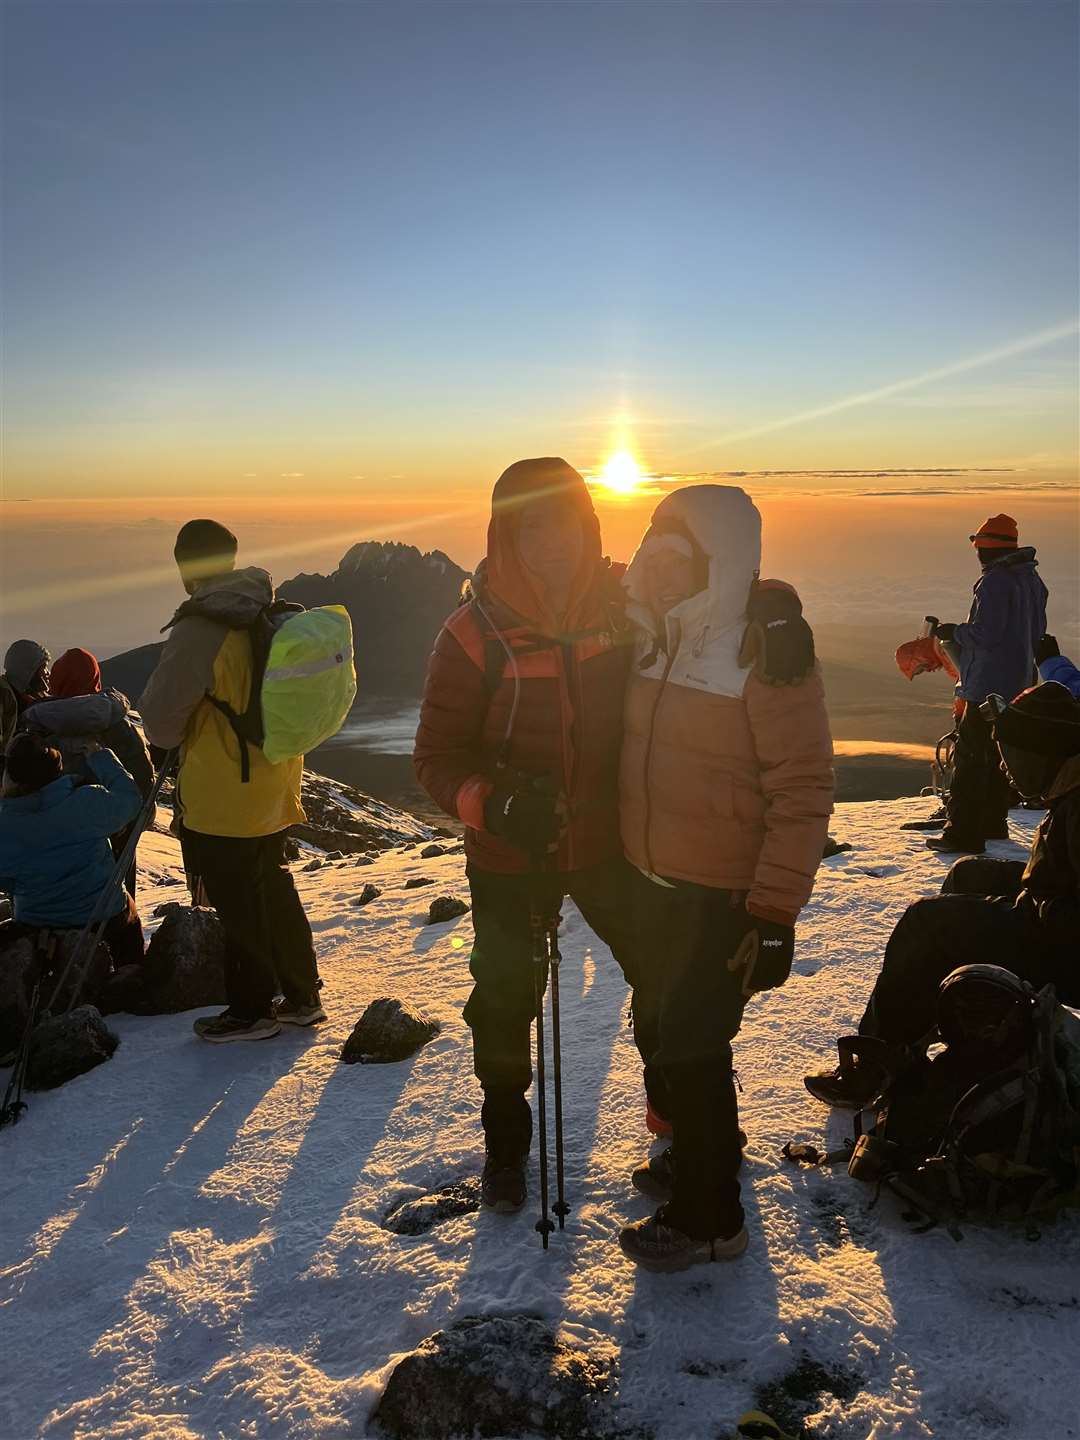 Sunrise was spectacular on the morning of the summiting